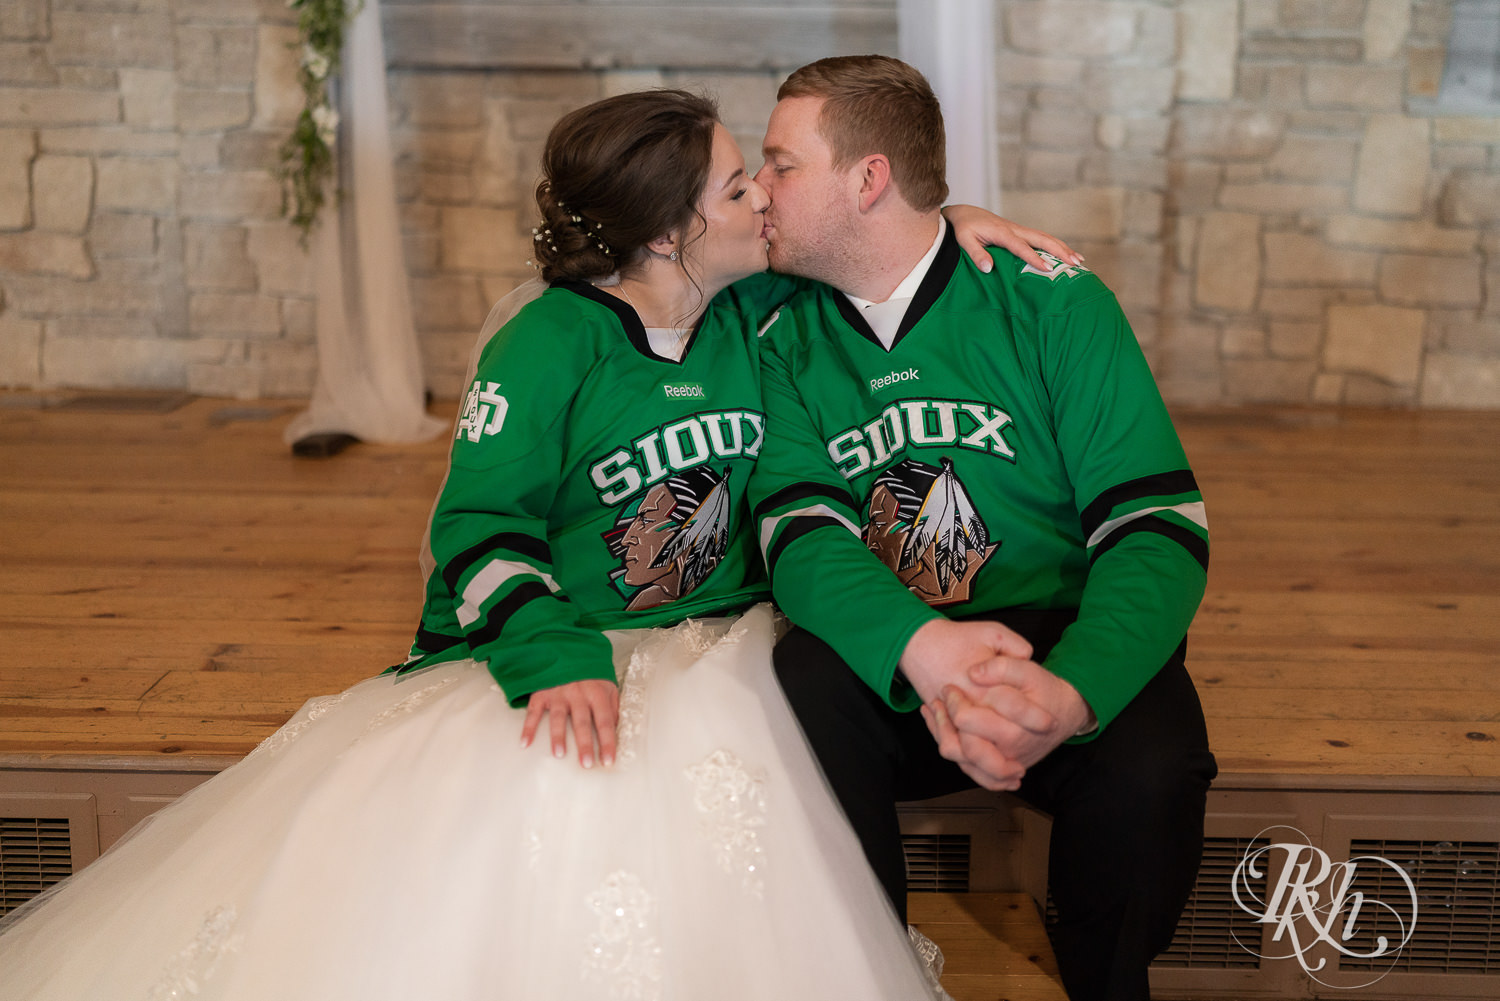 Bride and groom dressed in ND Sioux hockey jerseys at Glenhaven Events in Farmington, Minnesota.